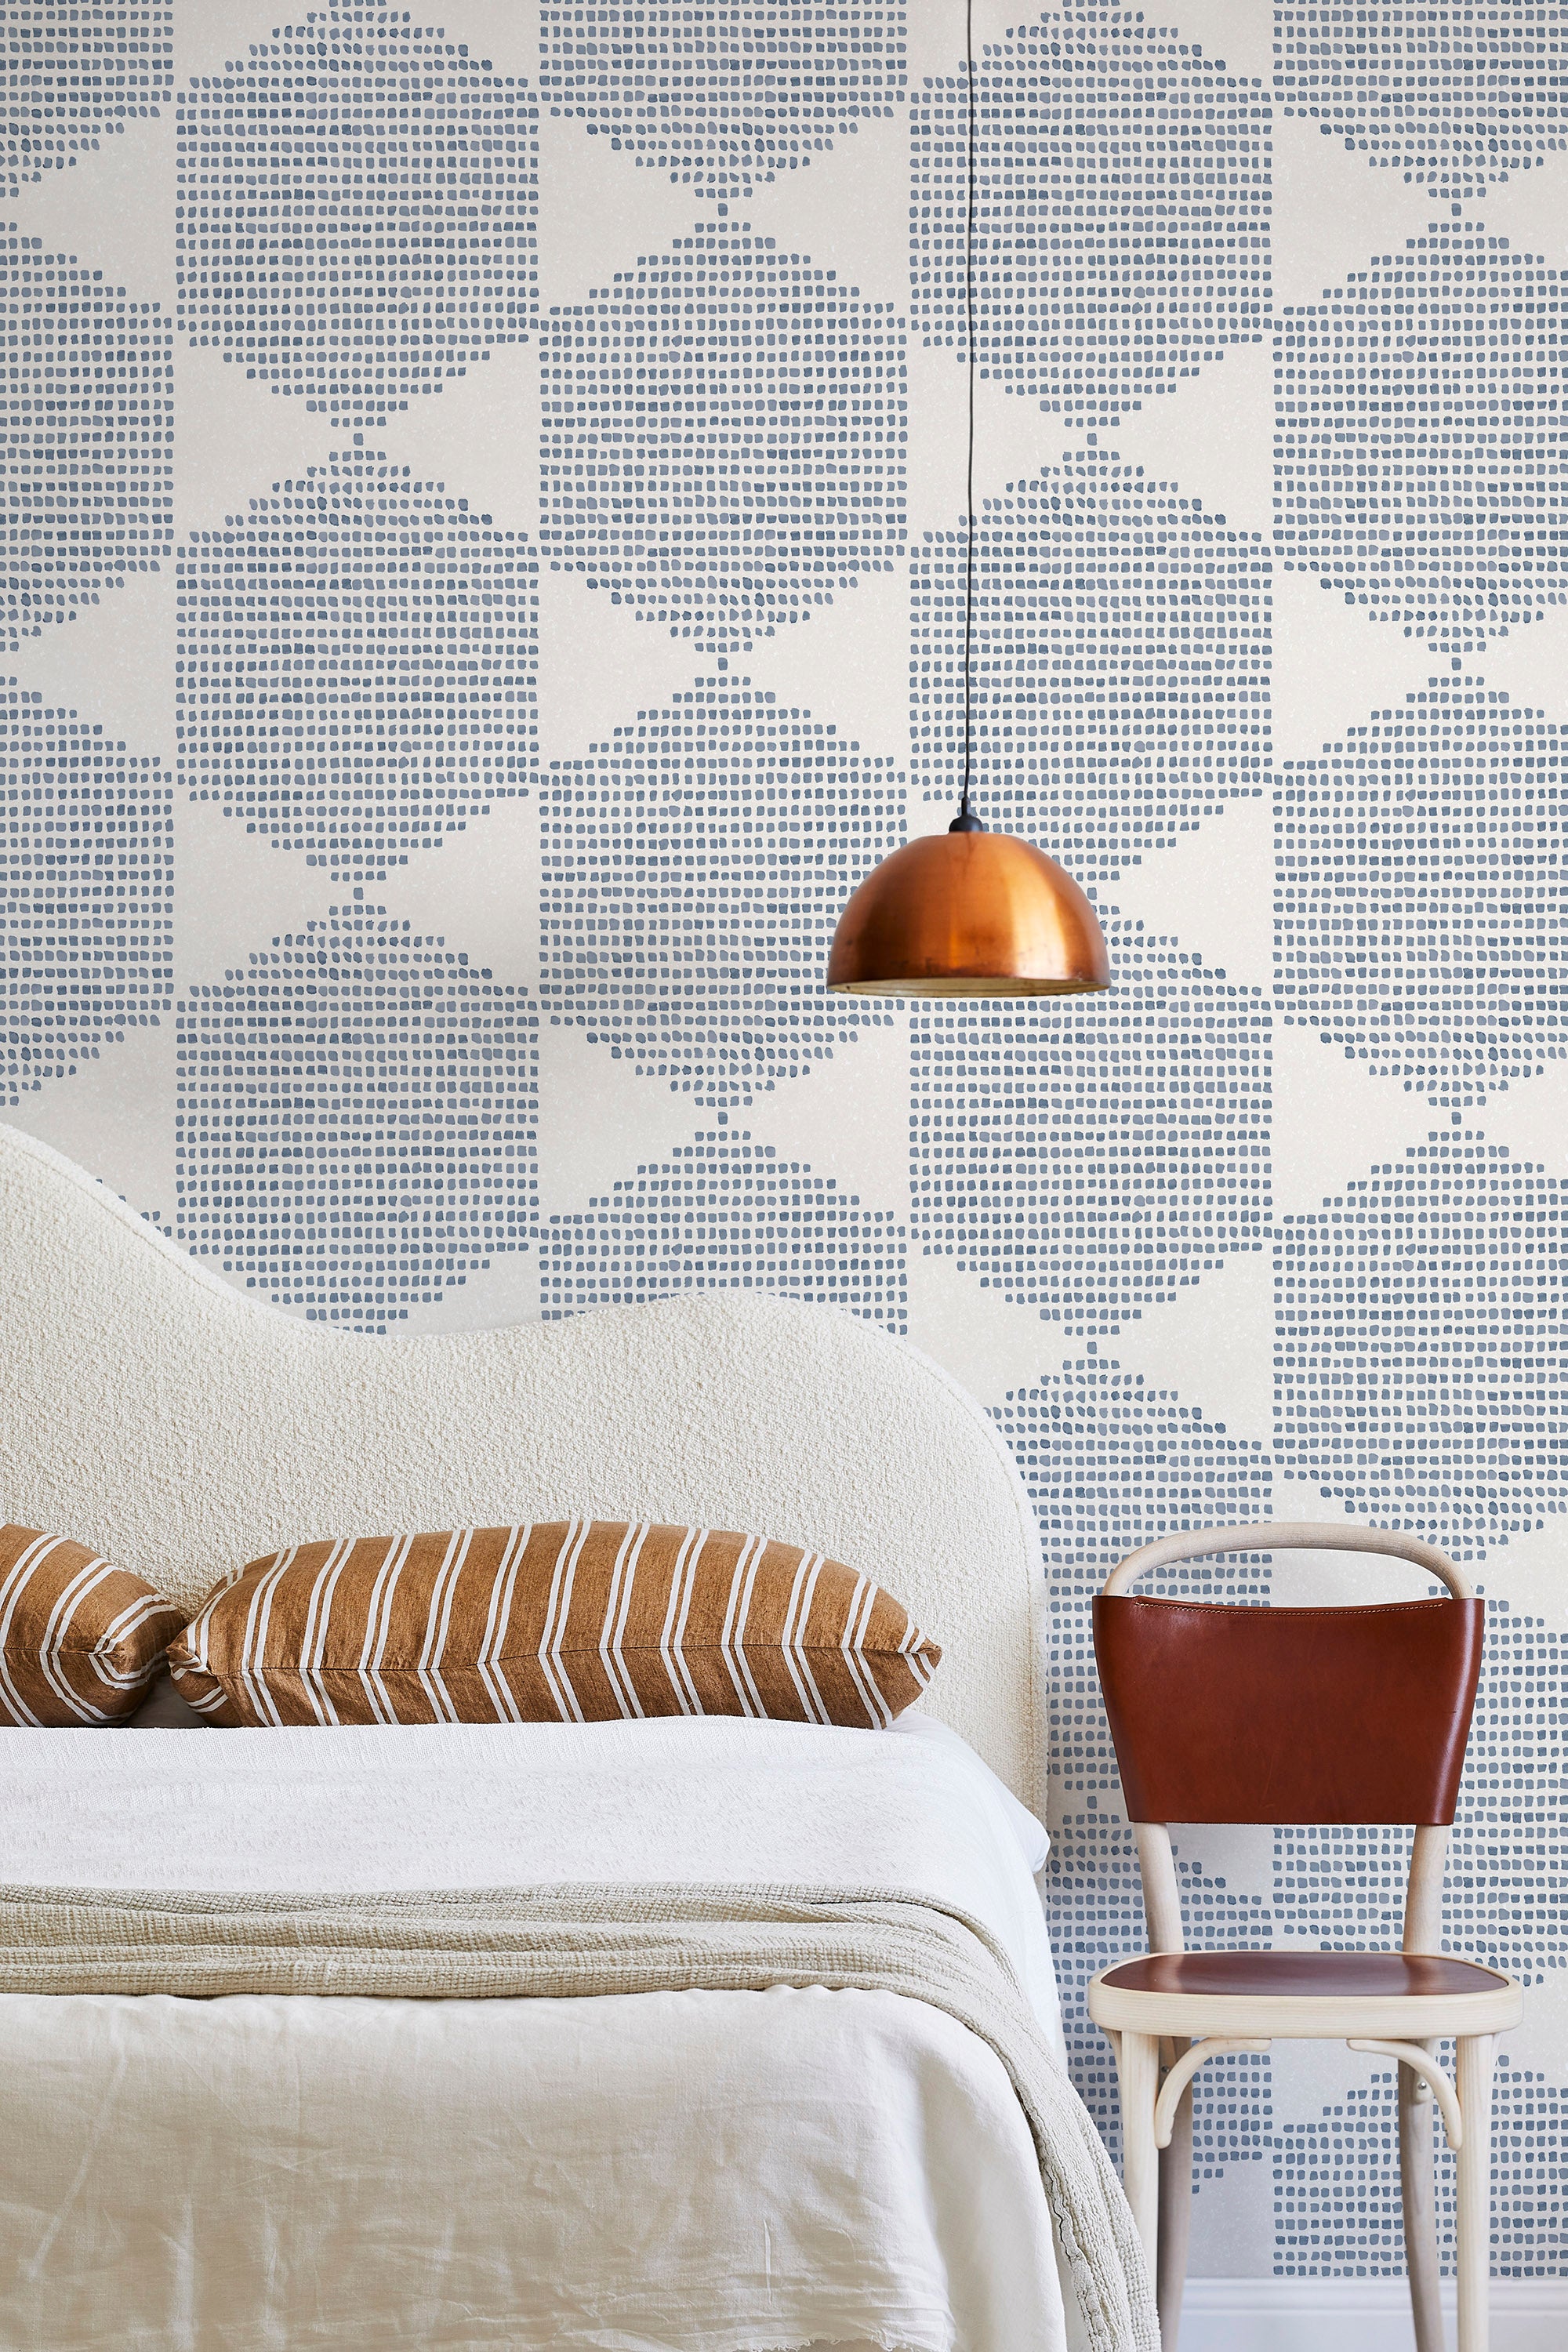 A modernist bed, hanging lamp and chair stand in front of a wall papered in a geometric star print in blue and cream.